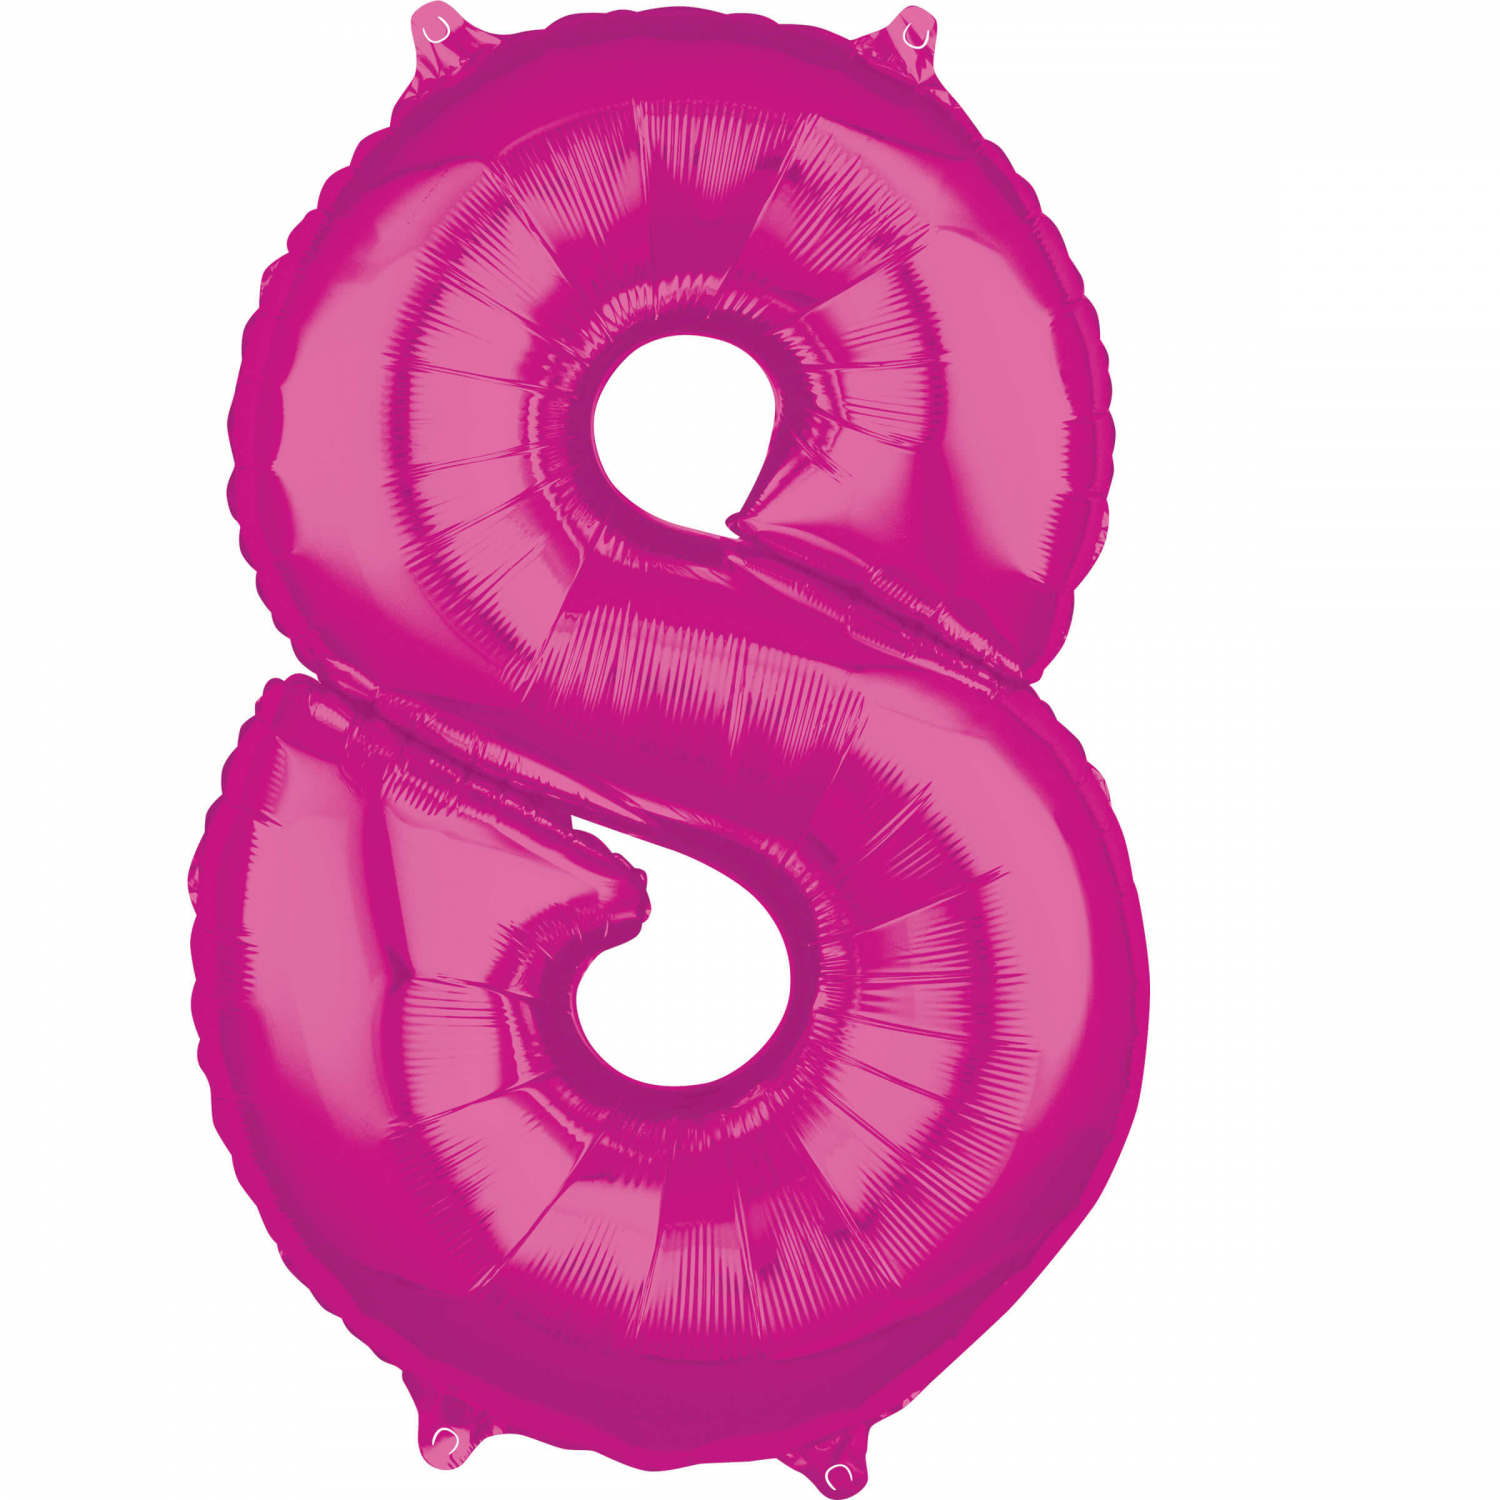 Foil balloon birthday number 8 pink 66cm